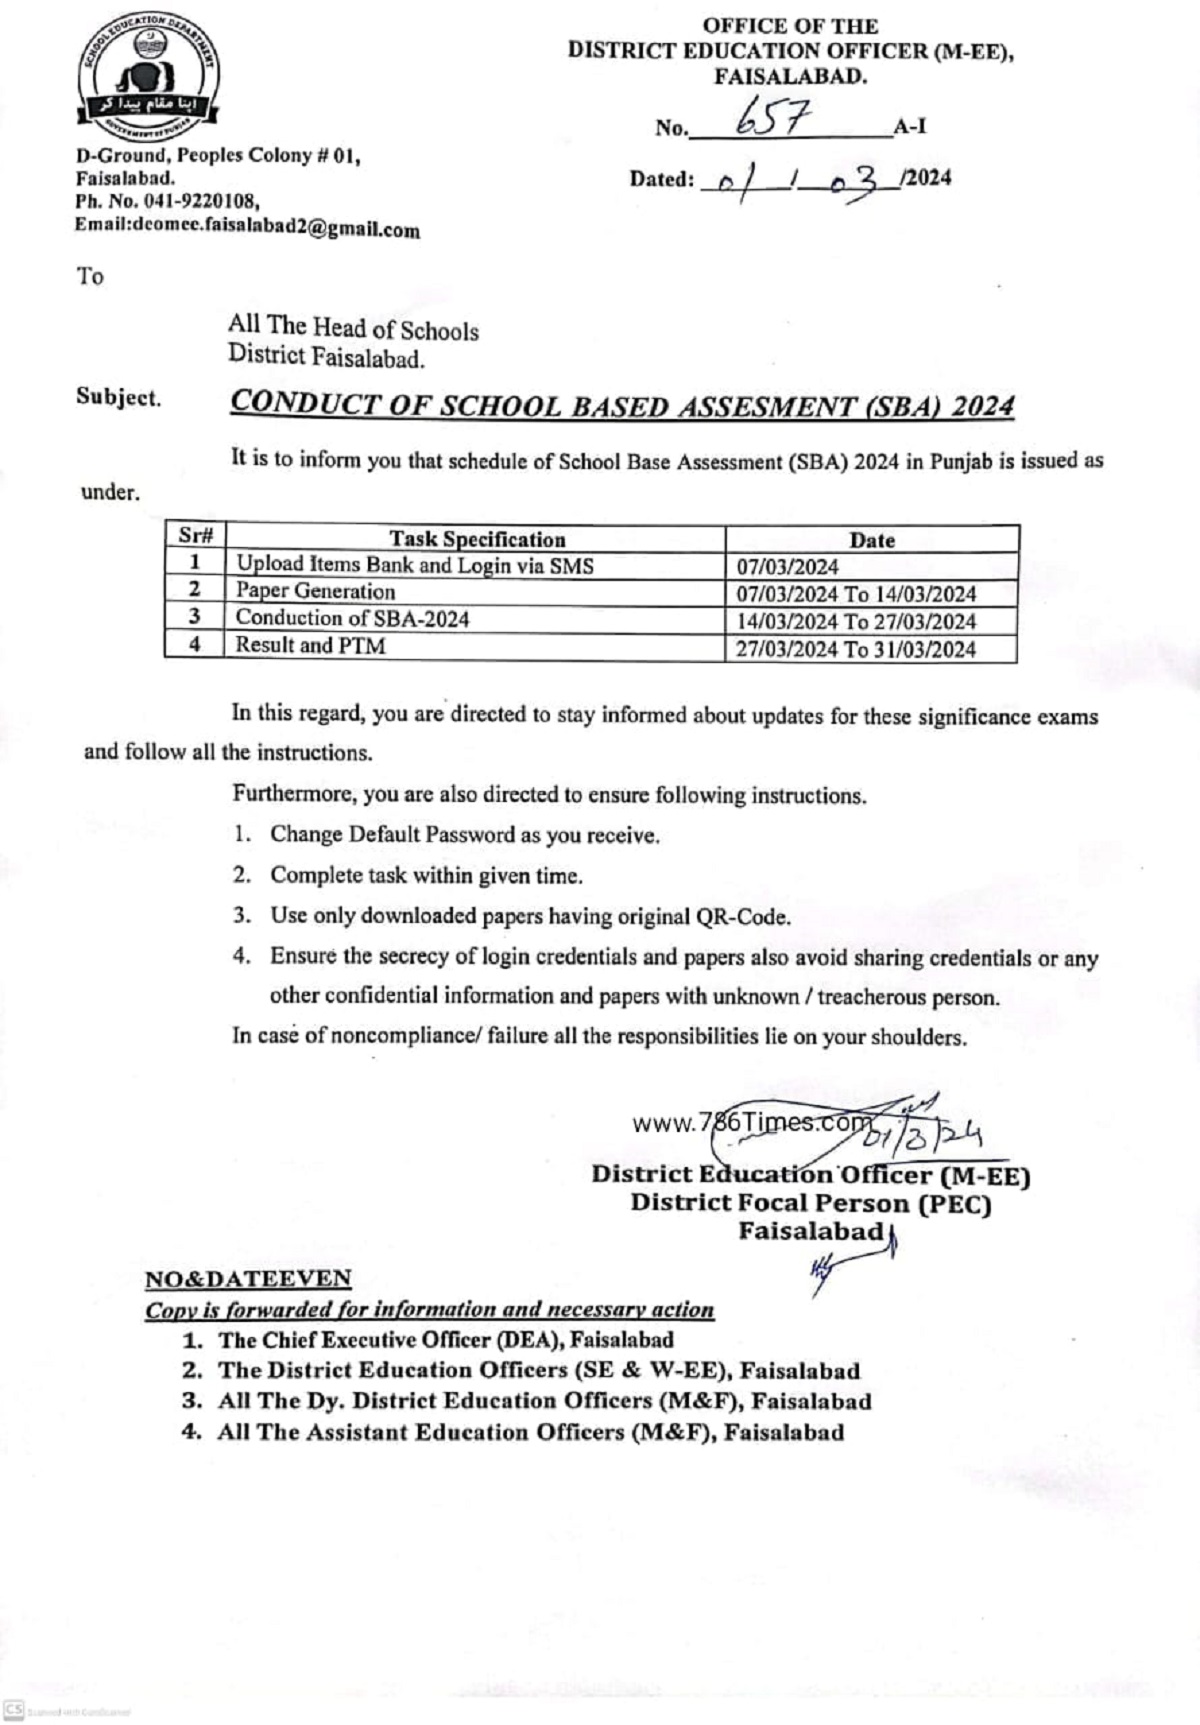 Conduct of SBA 2024 and upload of item bank by PEC